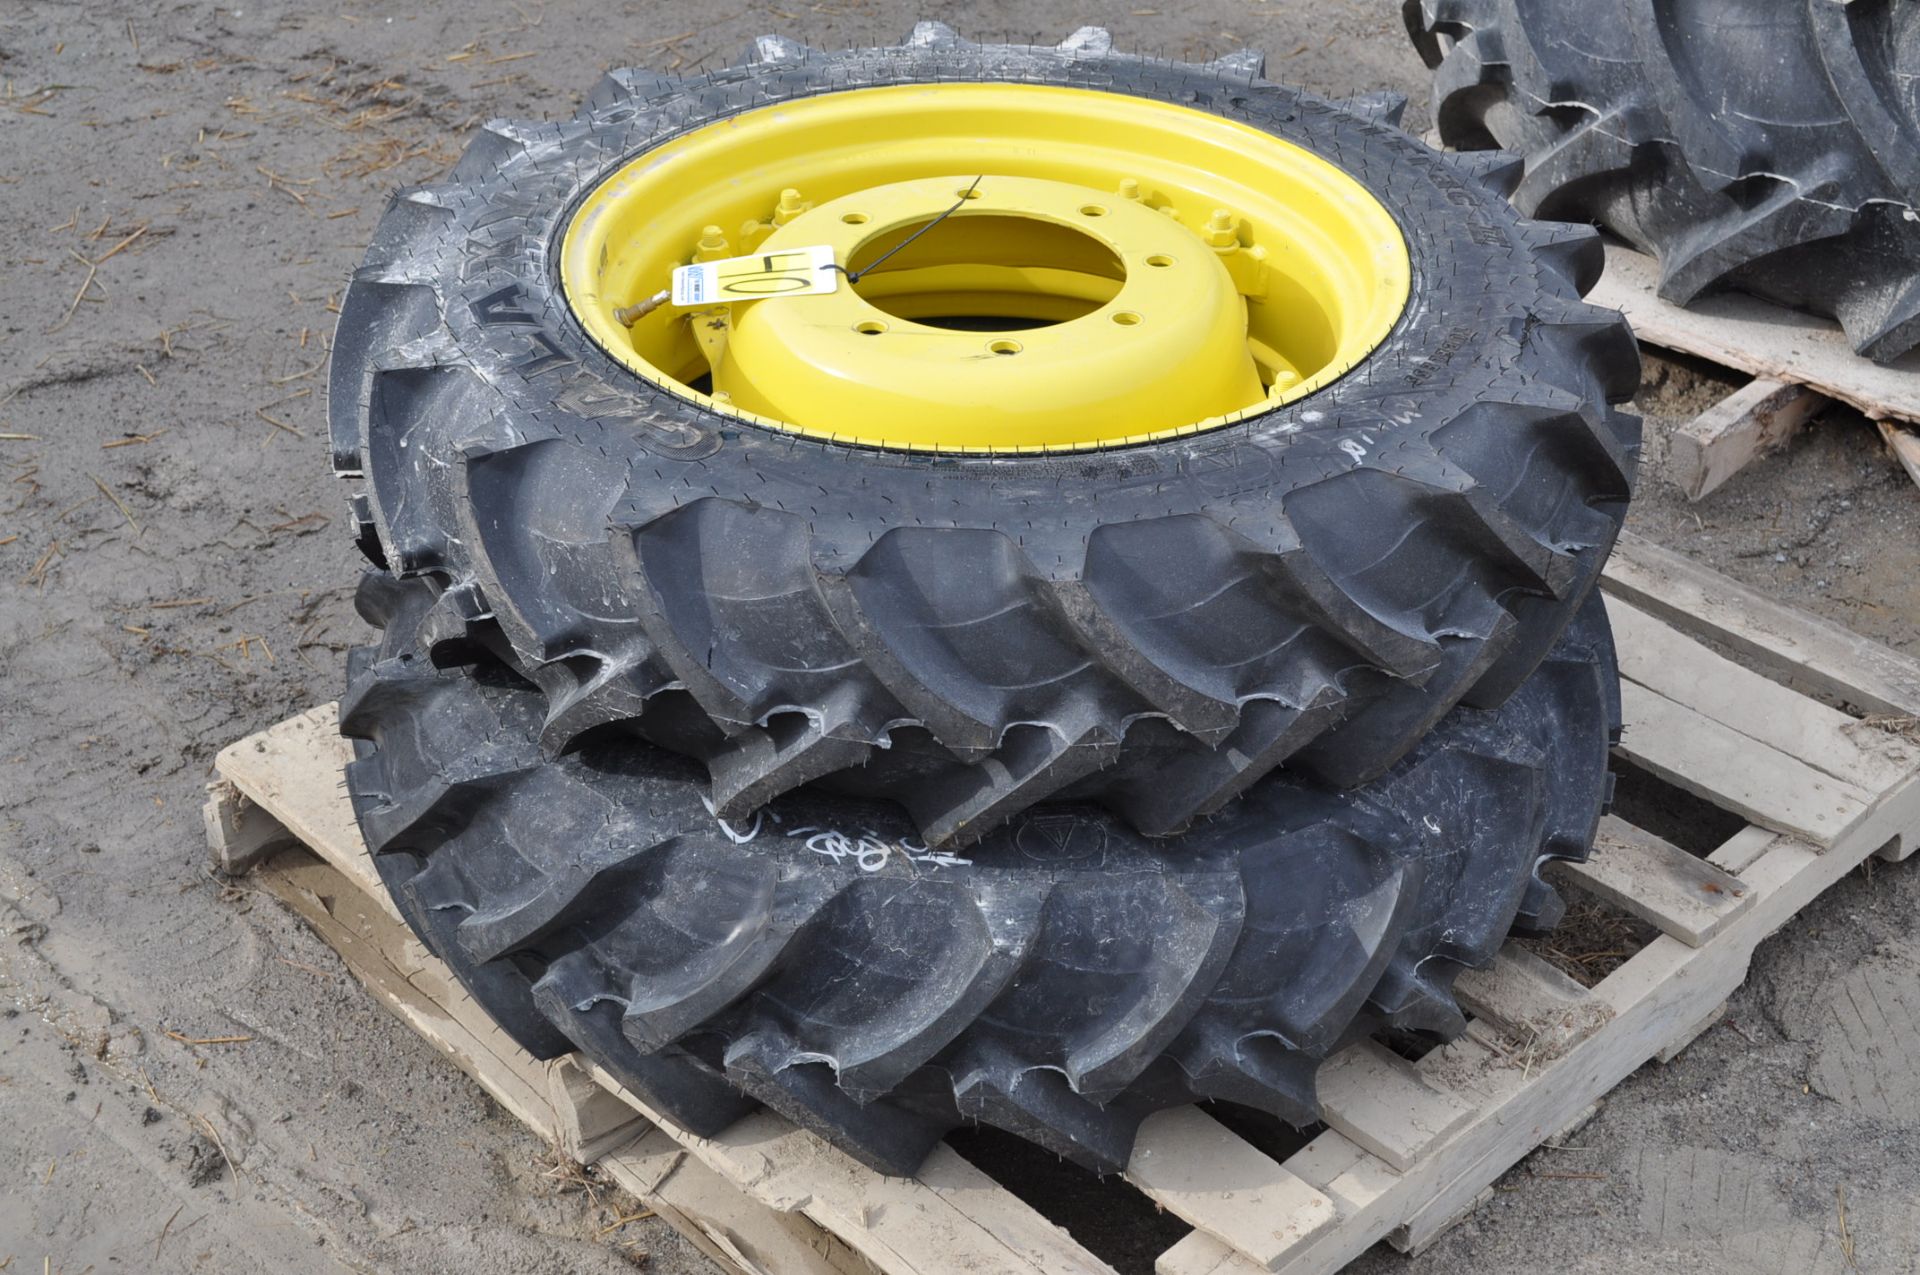 NEW Pair 9.5 – 24 tires on 8 bolt rims, fits John Deere 5000 series tractor - Image 2 of 3